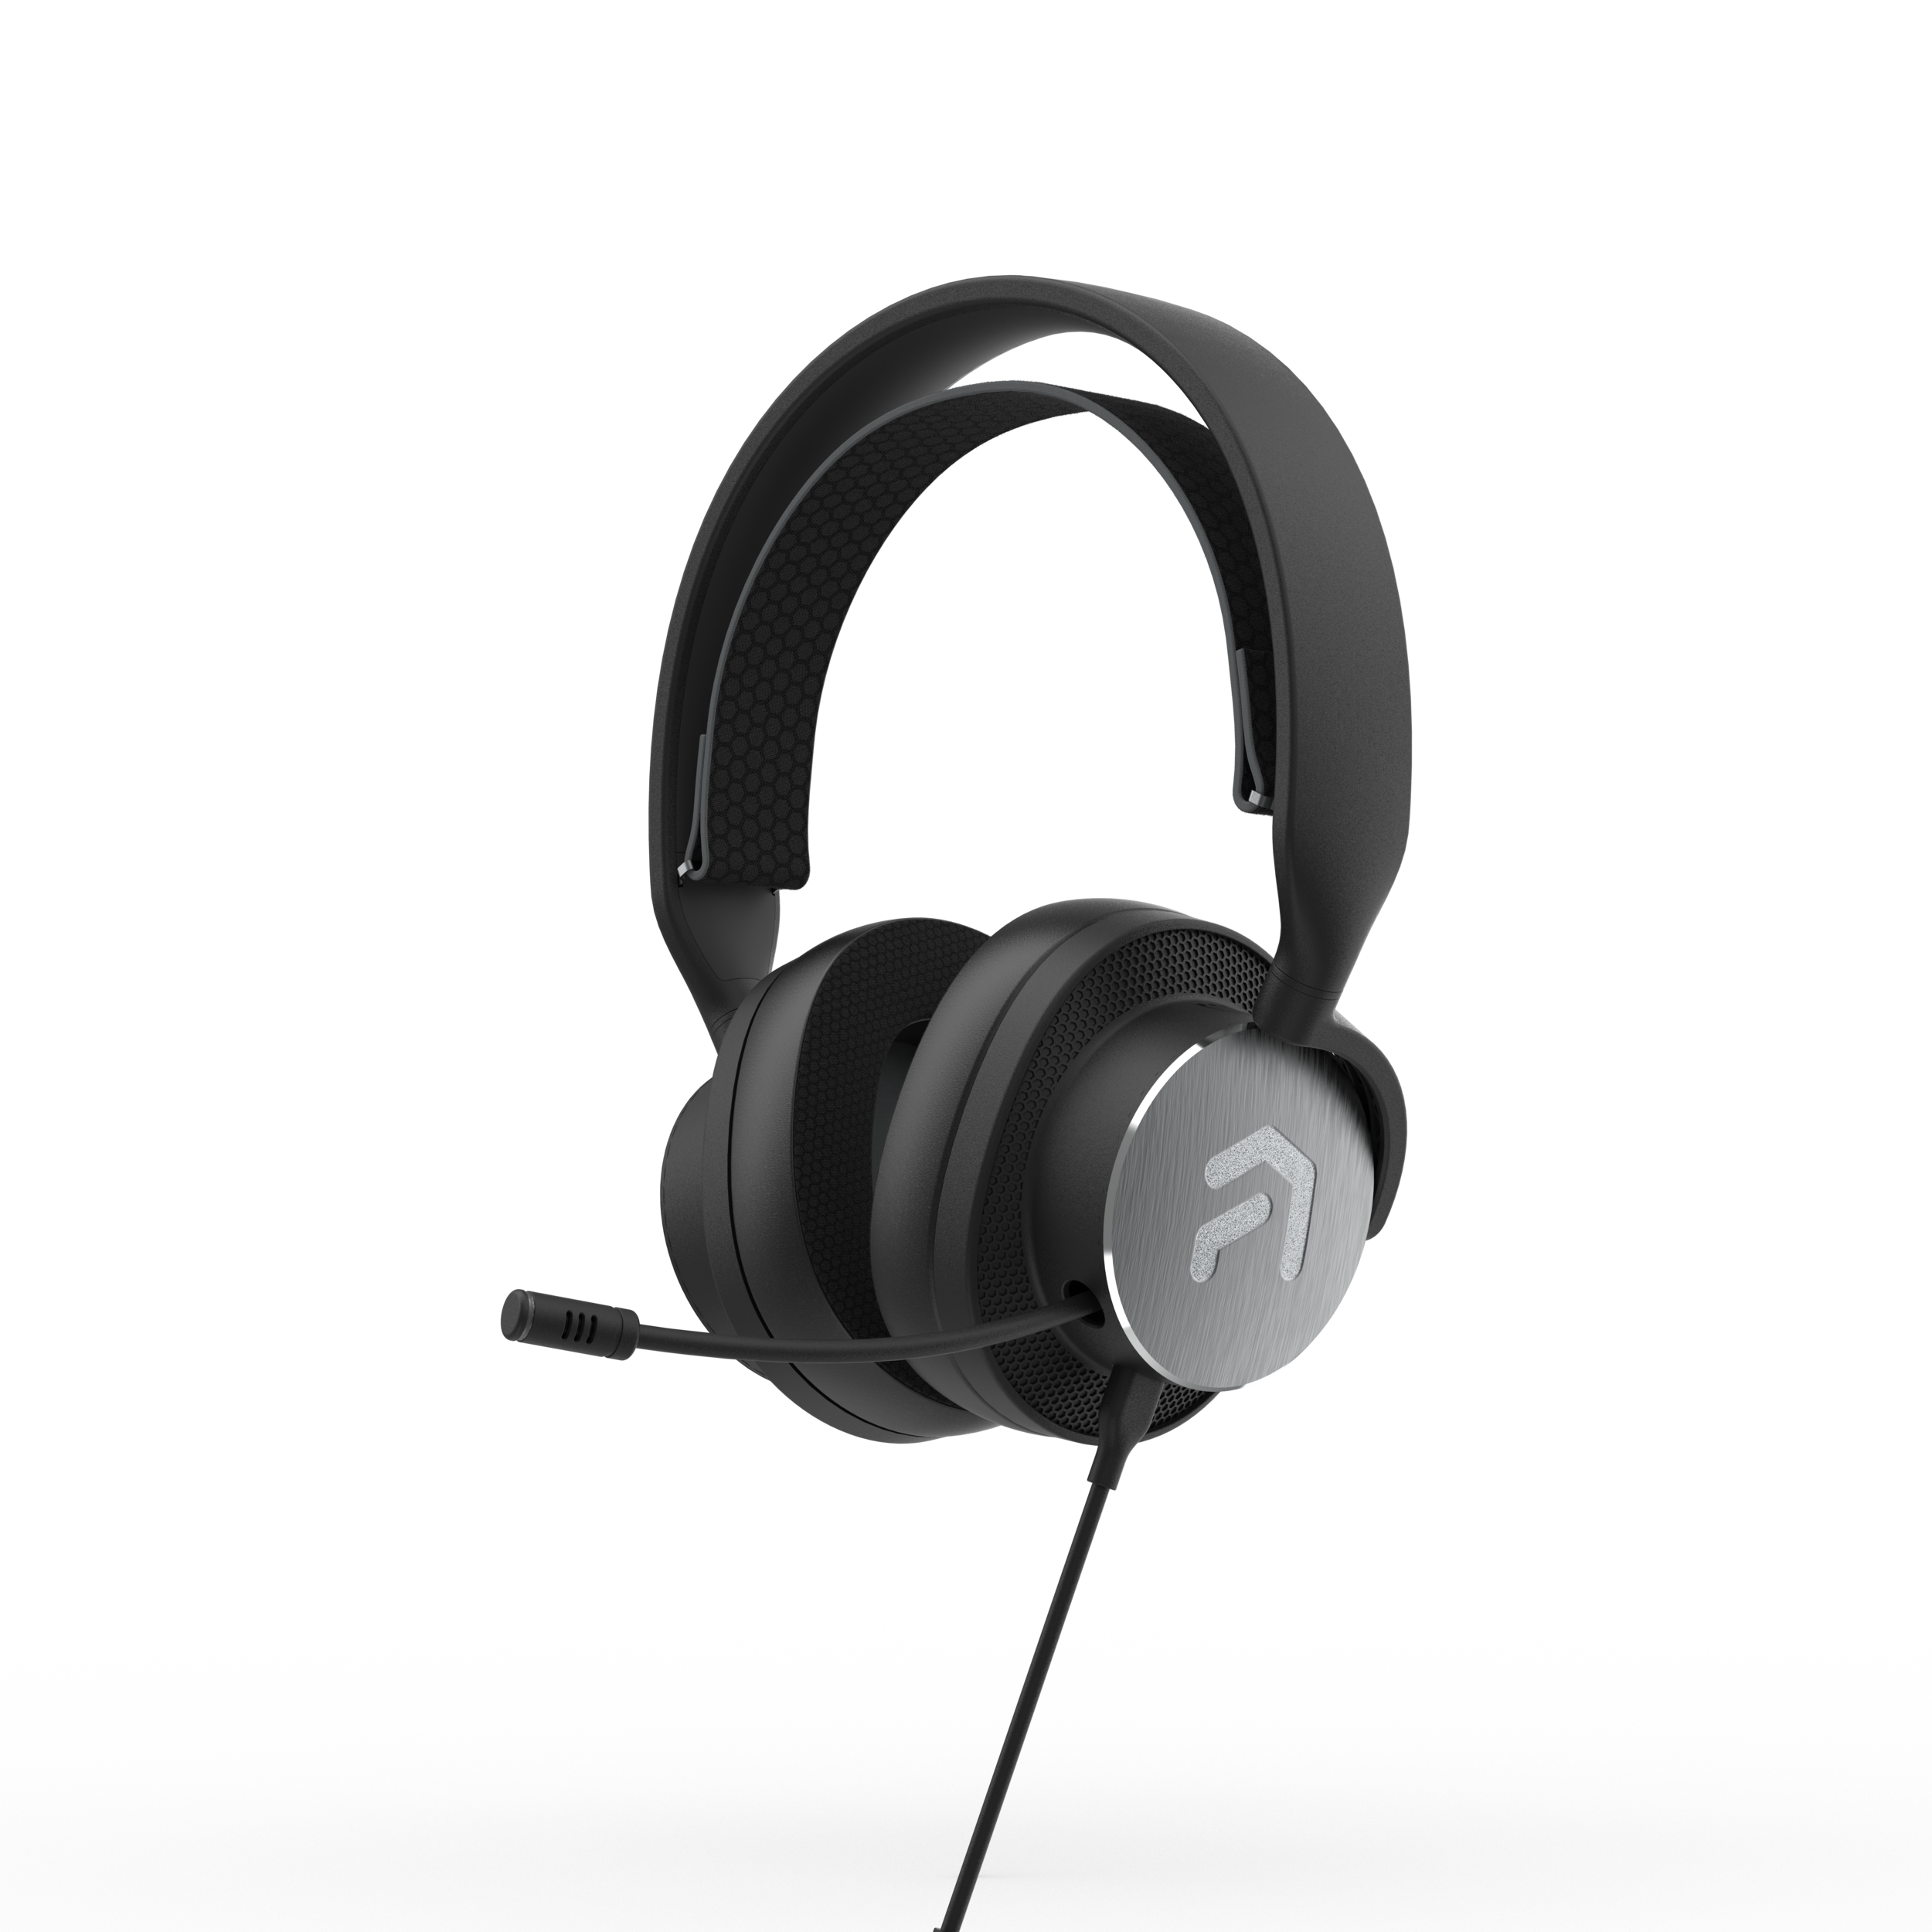 Wired Headphones PNG Free File Download